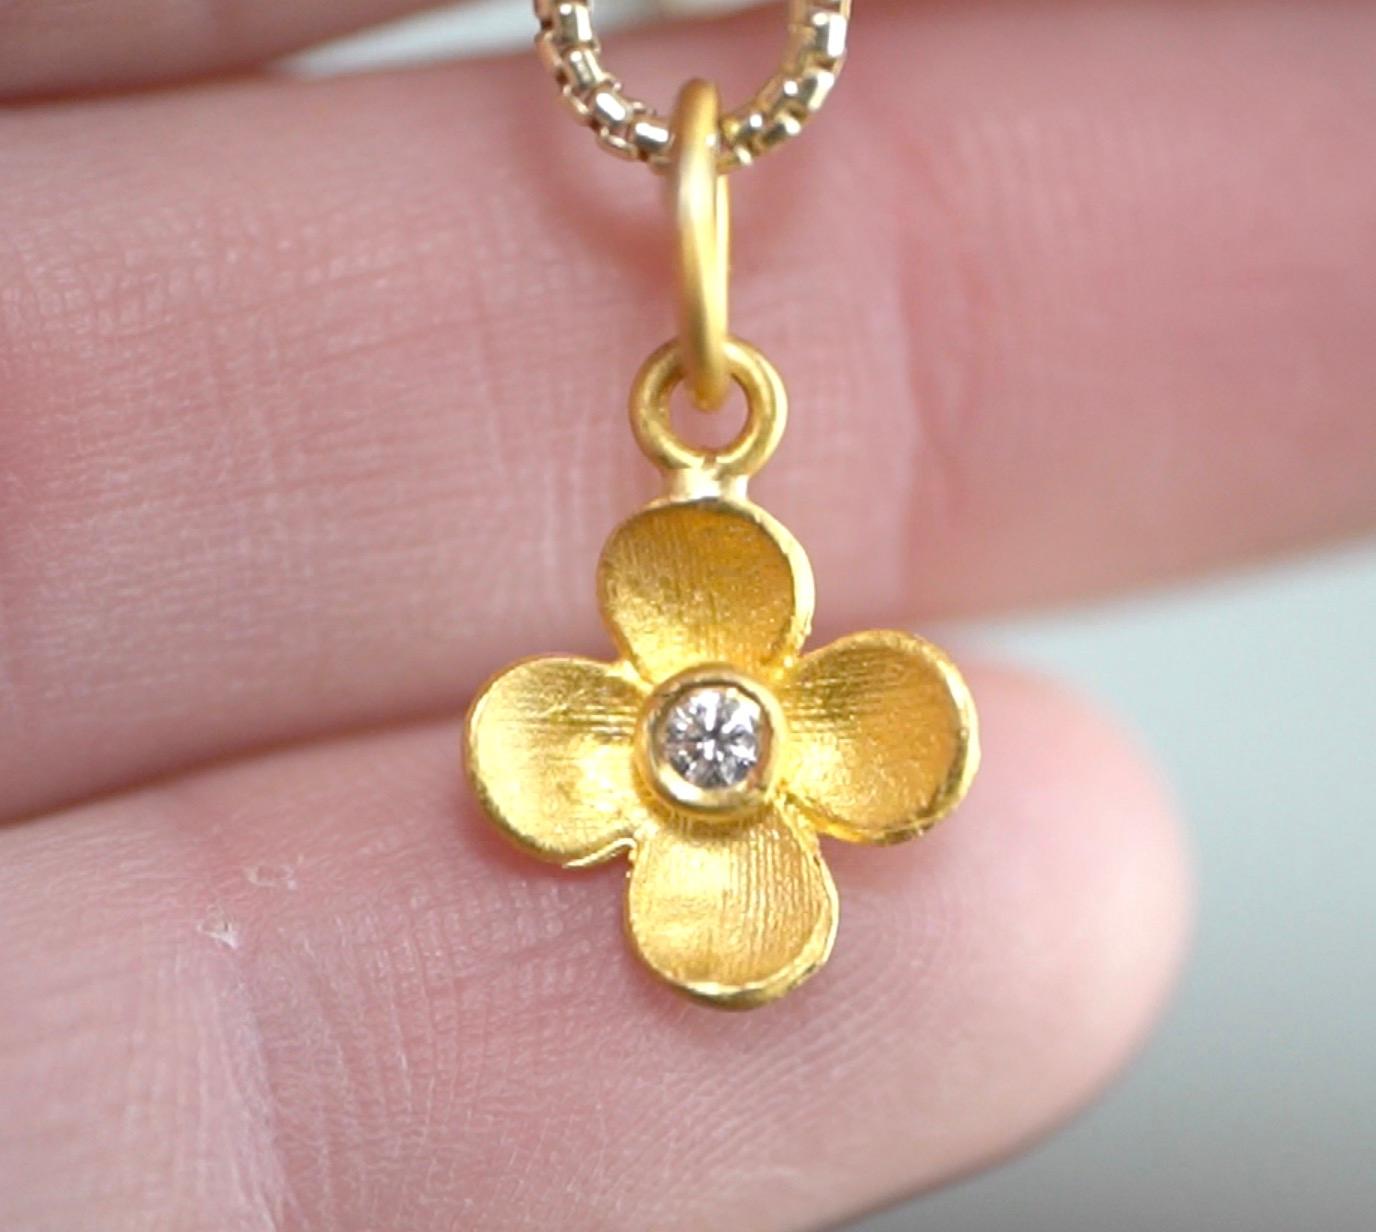 Miniature Four-Petal Flower Charm Pendant Necklace with Center Diamond, 24kt Solid Gold by Prehistoric Works of Istanbul, Turkey. These pendants pair well alone or with other pendants or with other miniature pendants. Great for layering. Comes with